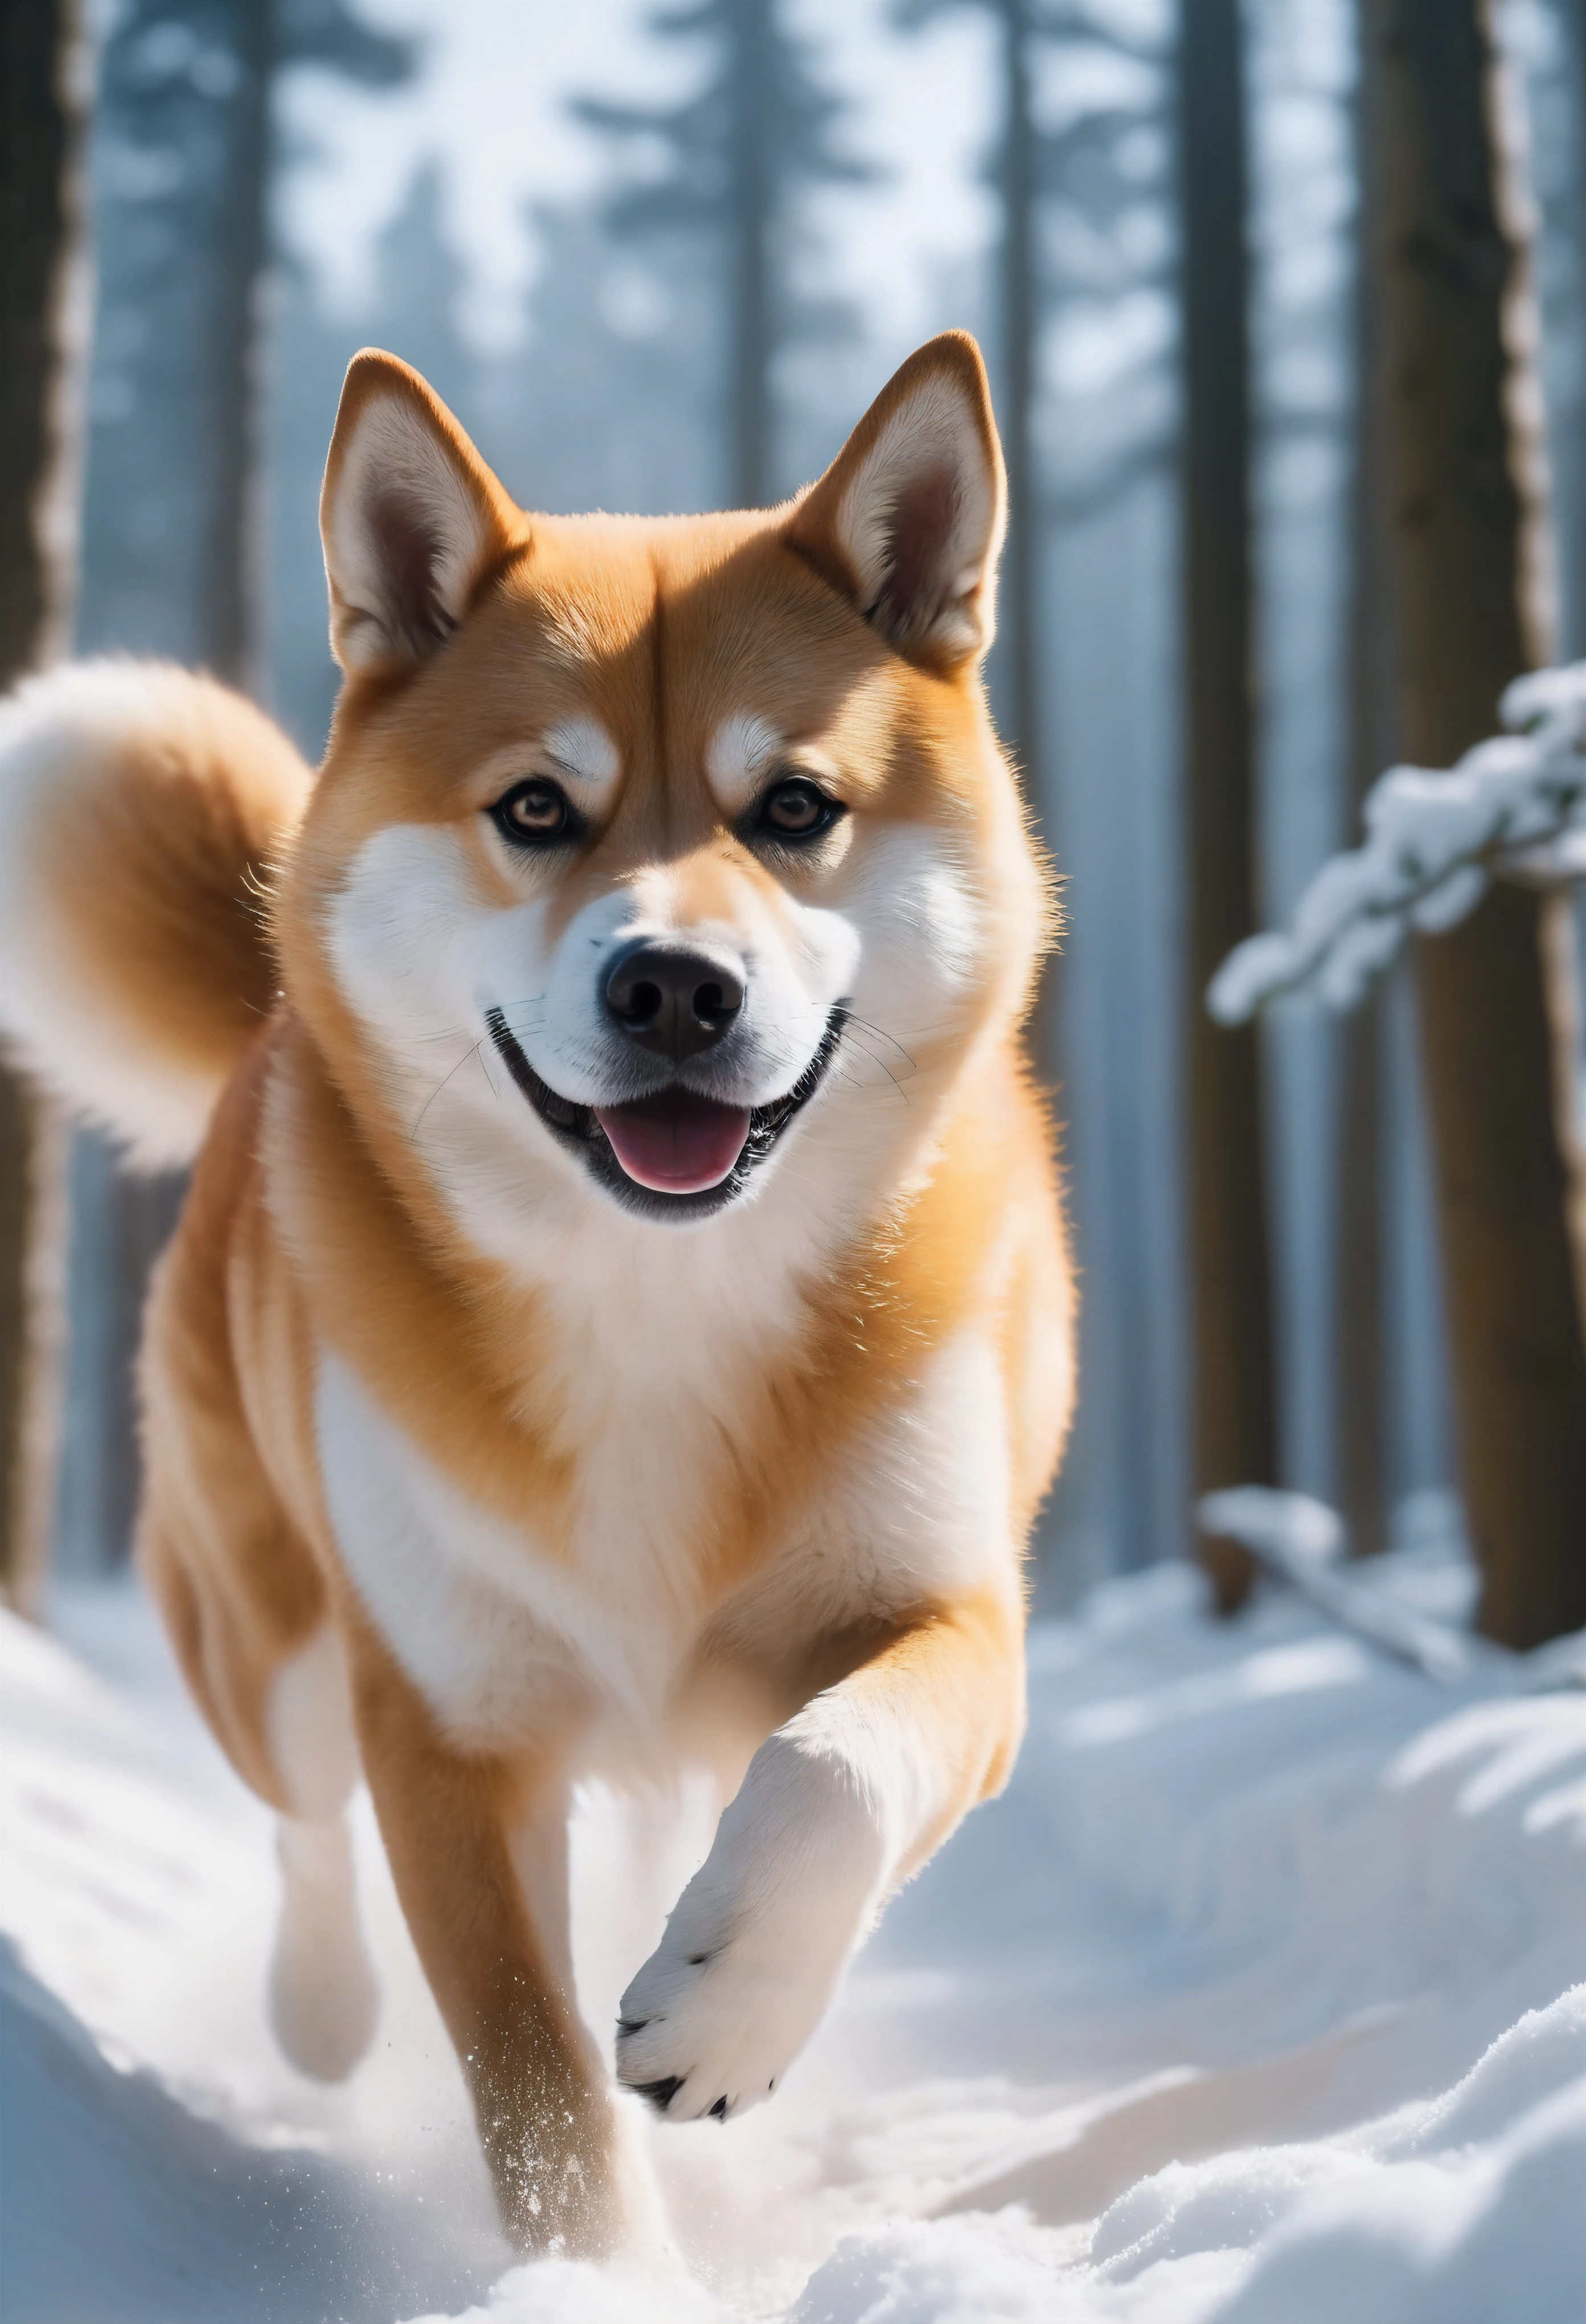 ((Masterpiece in maximum 16K resolution):1.6),((soft_color_photograpy:)1.5), ((Ultra-Detailed):1.4),((Movie-like still images and dynamic angles):1.3). | (Macro shot cinematic photo of a Shiba Inu running through a snowy forest), ((Cute japanese dog):1.2), ((a dog running):1.1), (A clear sky), (macro lens), (Happy atmosphere), (shimmer), (visual experience),(Realism), (Realistic),award-winning graphics, film grain, extremely detailed, Digital Art, rtx, Unreal Engine, scene concept anti glare effect, All captured with sharp focus. | Rendered in ultra-high definition with UHD and retina quality, this masterpiece ensures anatomical correctness and textured skin with super detail. With a focus on high quality and accuracy, this award-winning portrayal captures every nuance in stunning 16k resolution, immersing viewers in its lifelike depiction. | ((perfect_composition, perfect_design, perfect_layout, perfect_detail, ultra_detailed)), ((enhance_all, fix_everything)), More Detail, Enhance.